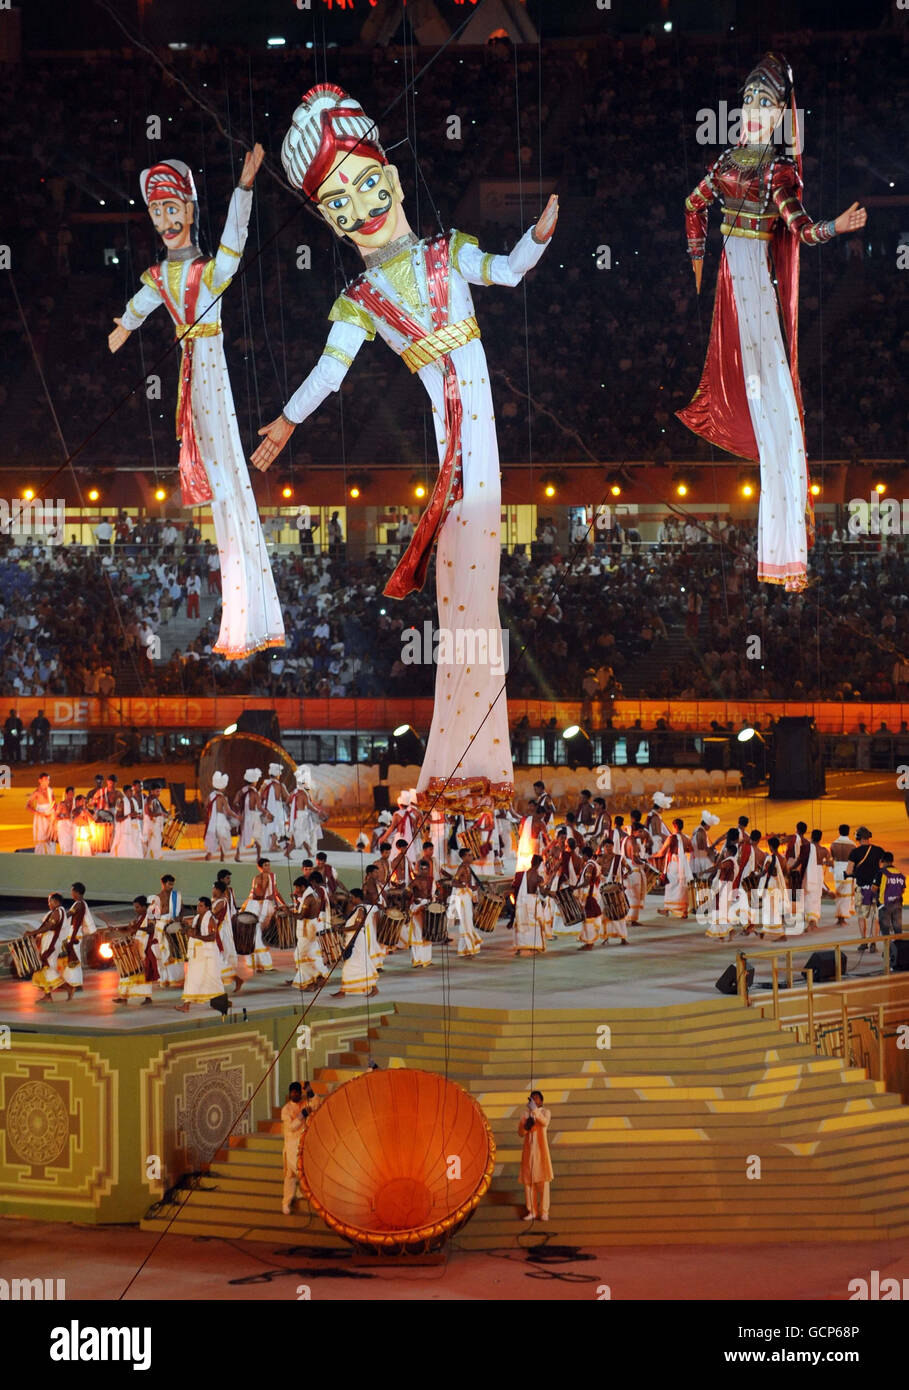 The opening ceremony of the 2010 Commonwealth Games takes place at the Jawaharlal Nehru Stadium in New Delhi, India. Stock Photo